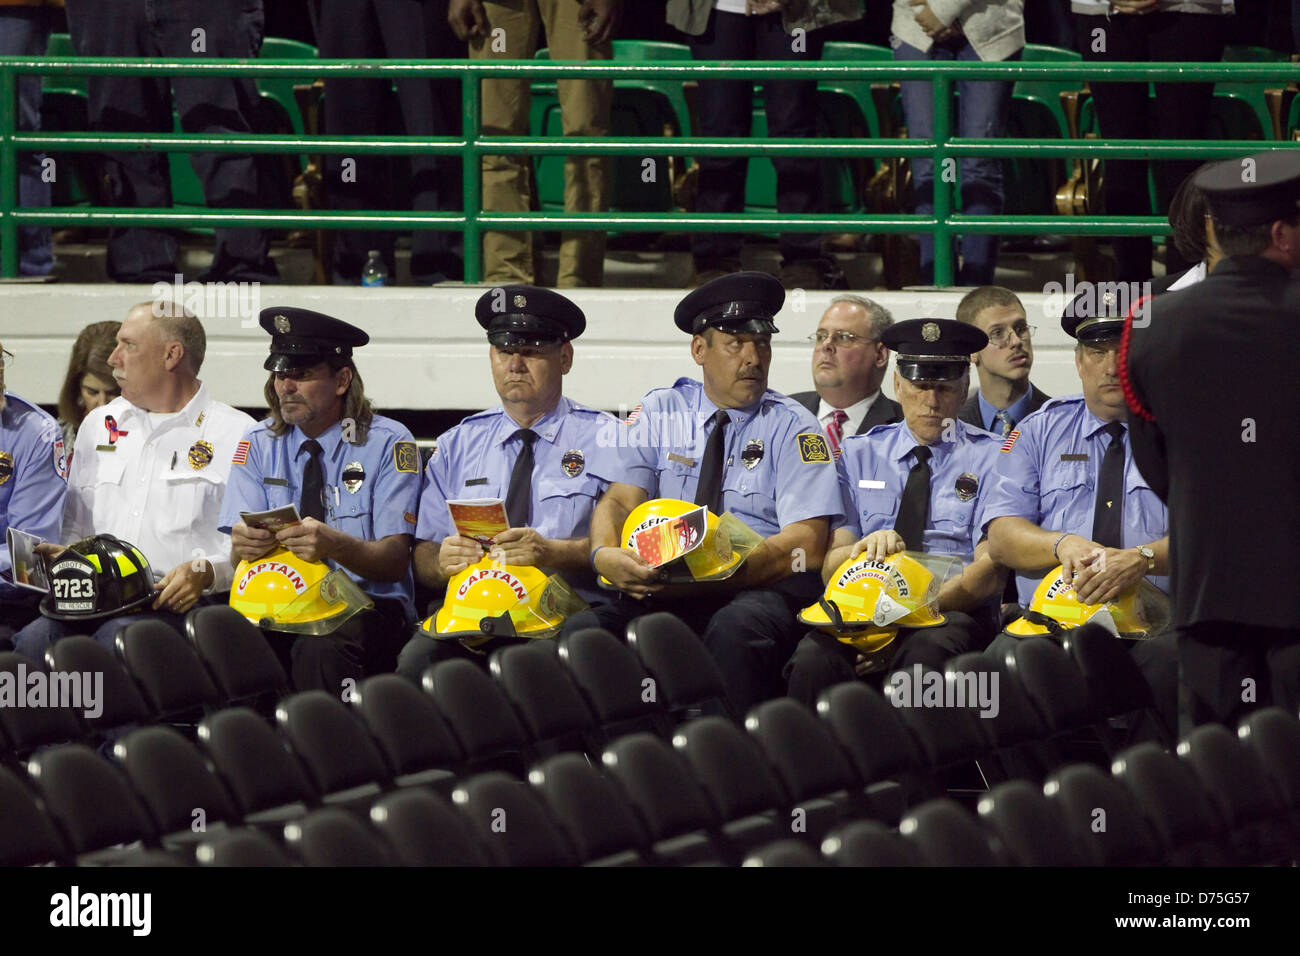 Firemen  with fireman hat sits in uniform to honor fallen firefighters who lost like in West, Texas fertilizer plant explosion Stock Photo